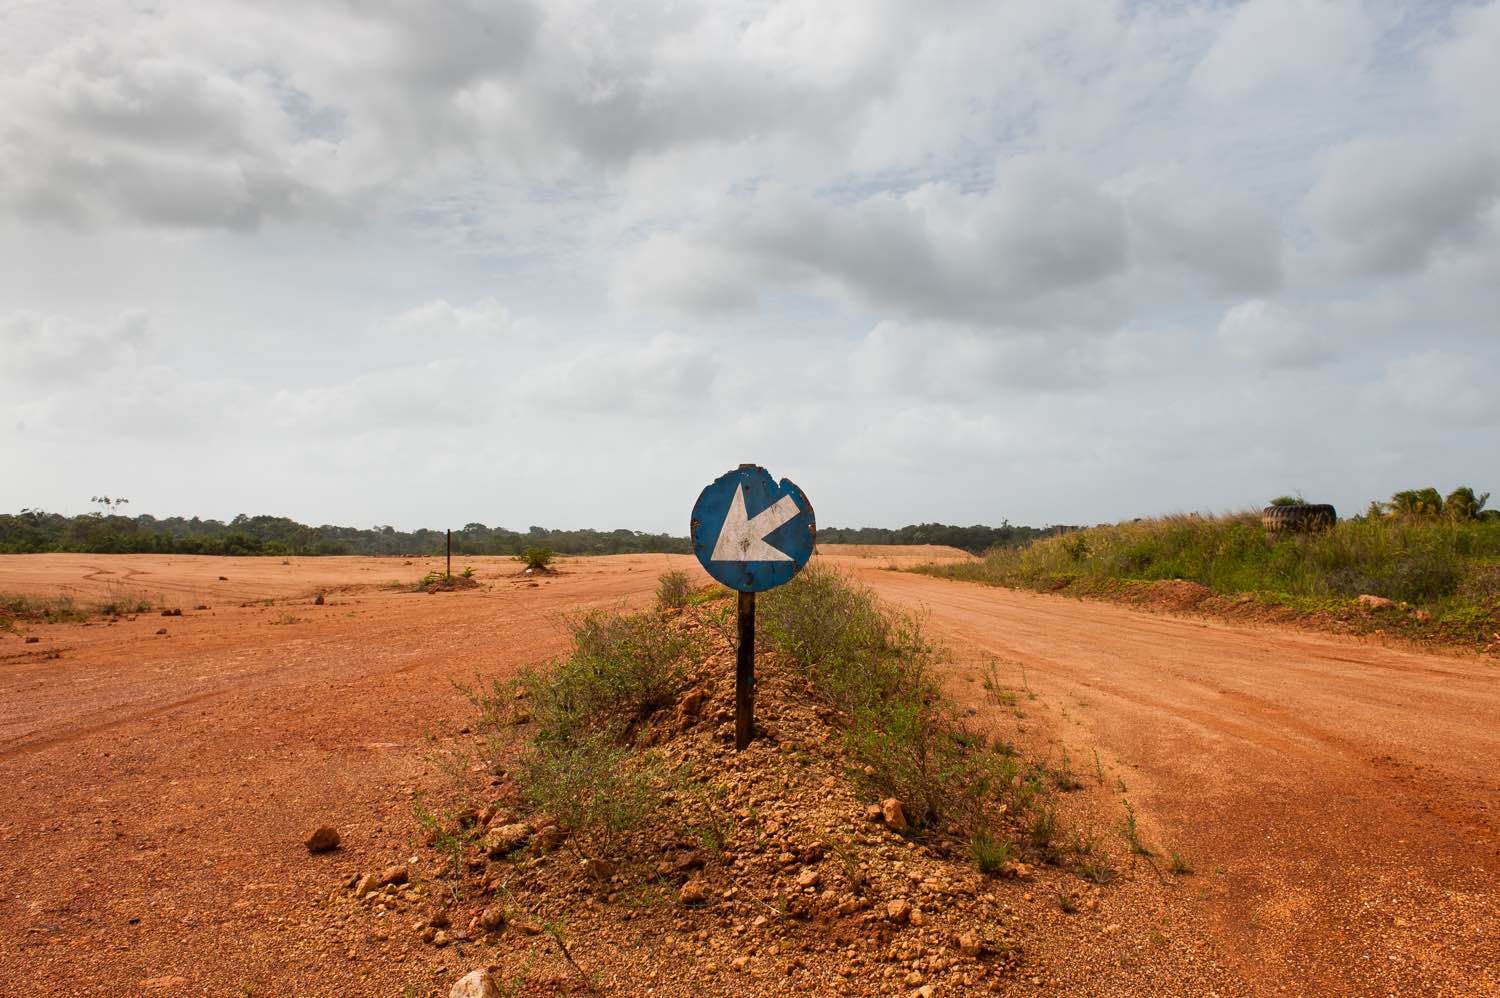 Red bauxite roads run for miles around the shuttered mining and mill operations that once made Suralco one of Suriname's largest employers. The company, a subsidiary of Alcoa, has promised to remediate the land. Image by Stephanie Strasburg. Suriname, 2017.
